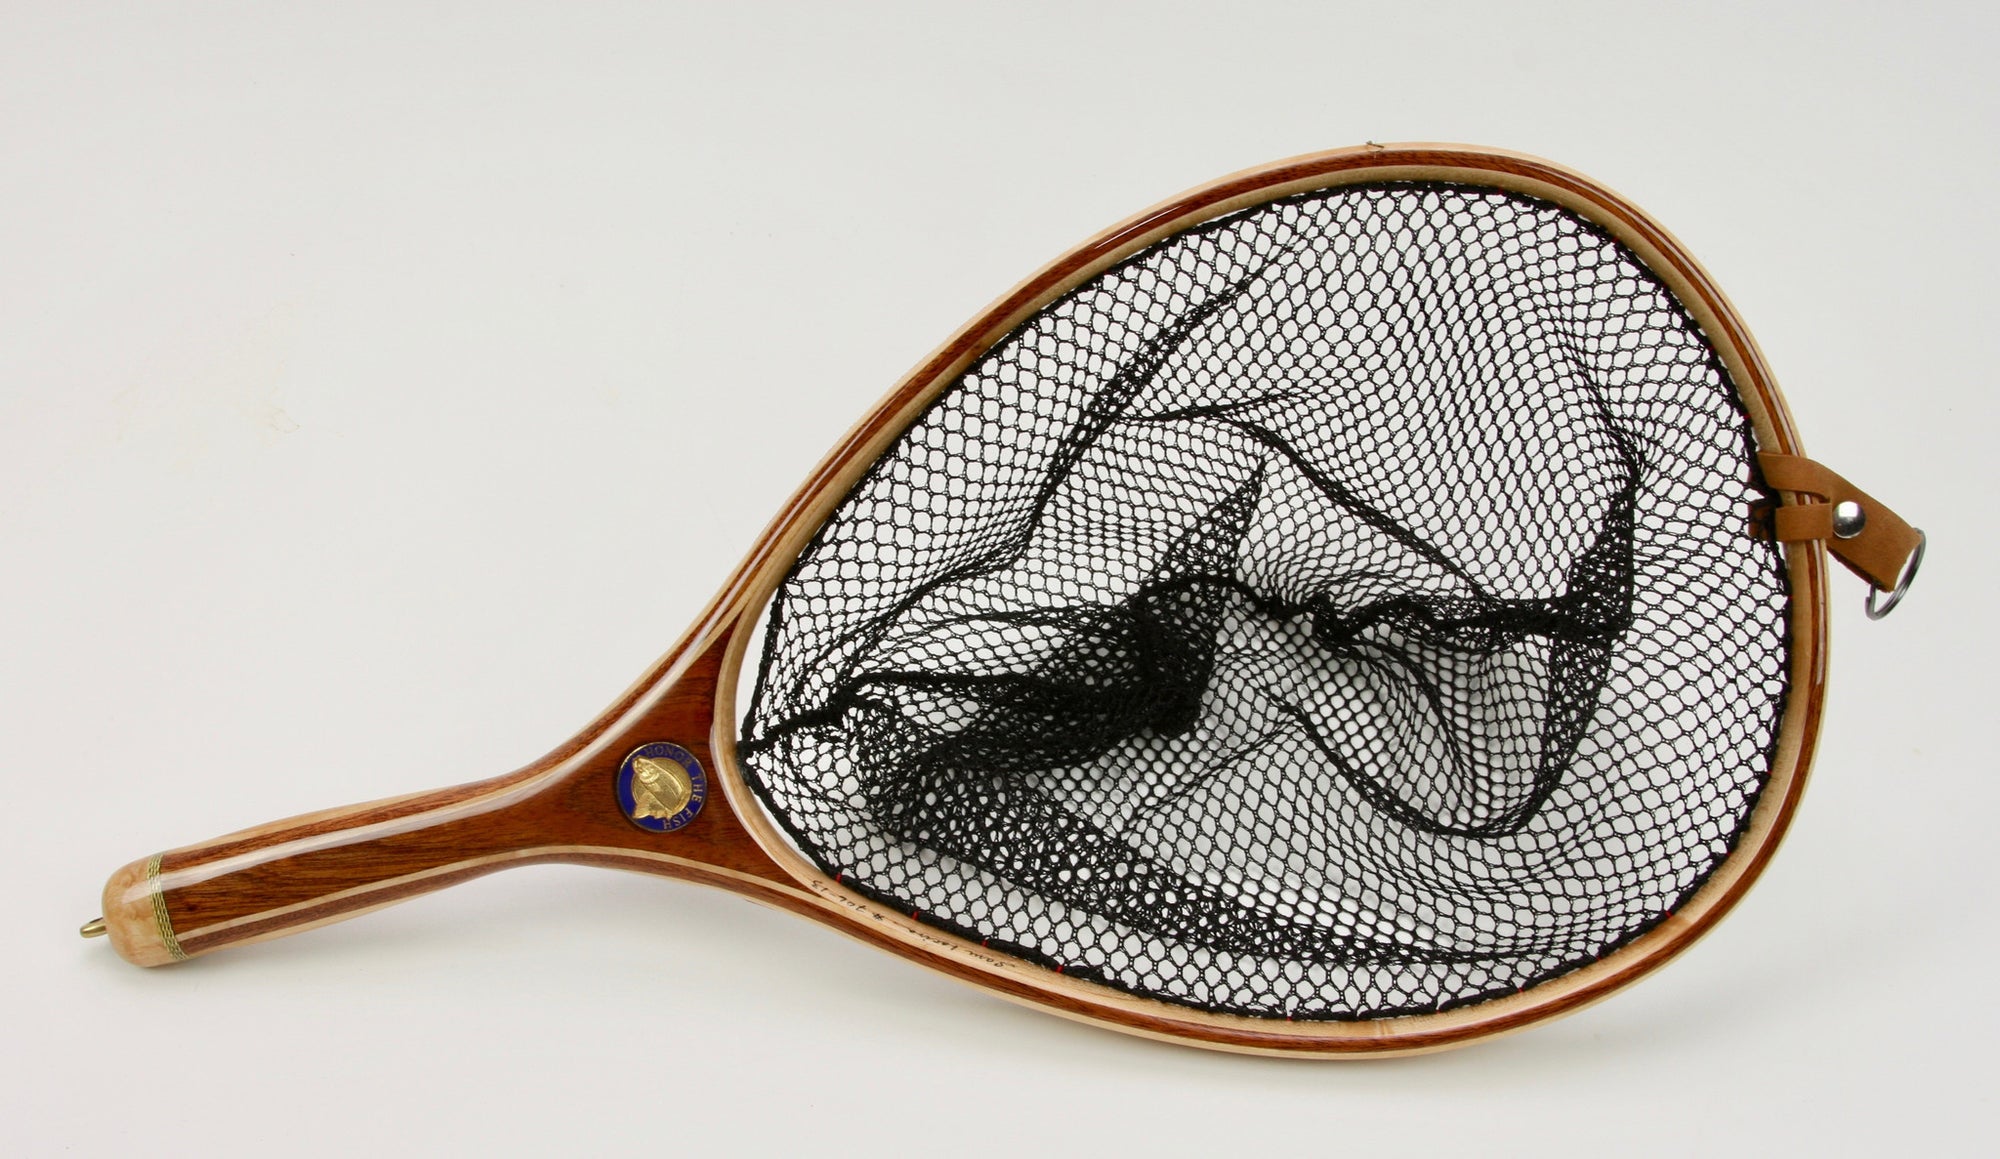 Wooden landing net with brown handle and medallion inset.